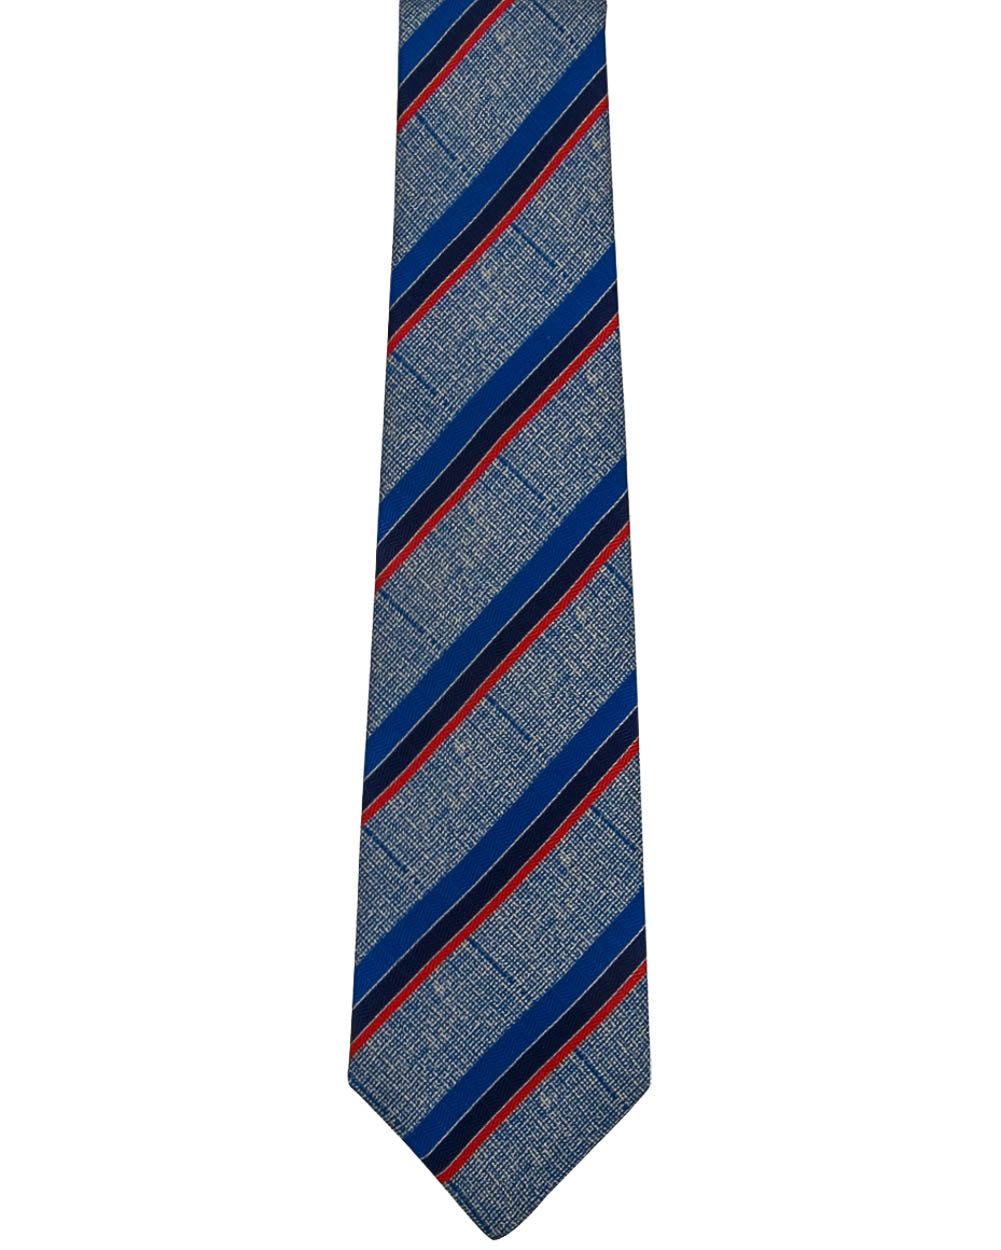 Blue and Red Multi Stripe Tie